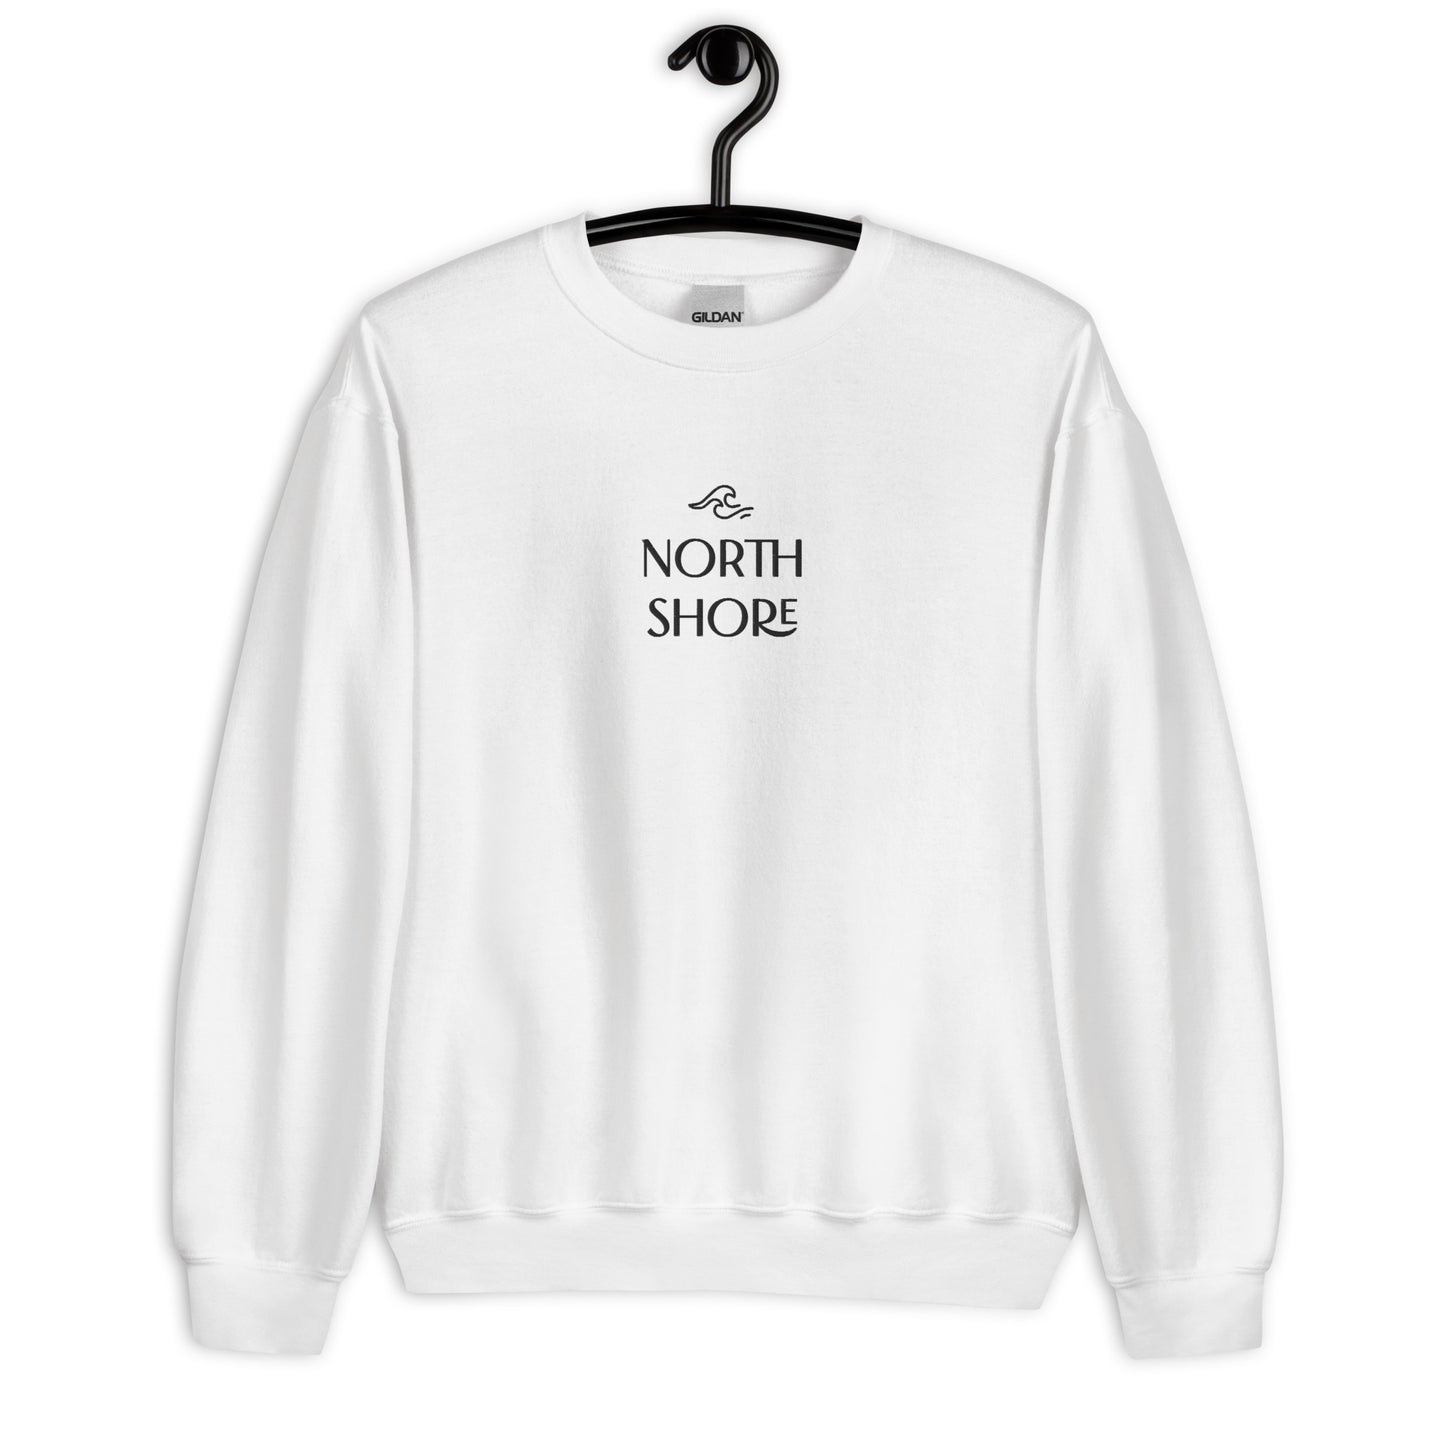 white crewneck that says "north shore" in black lettering with wave graphic